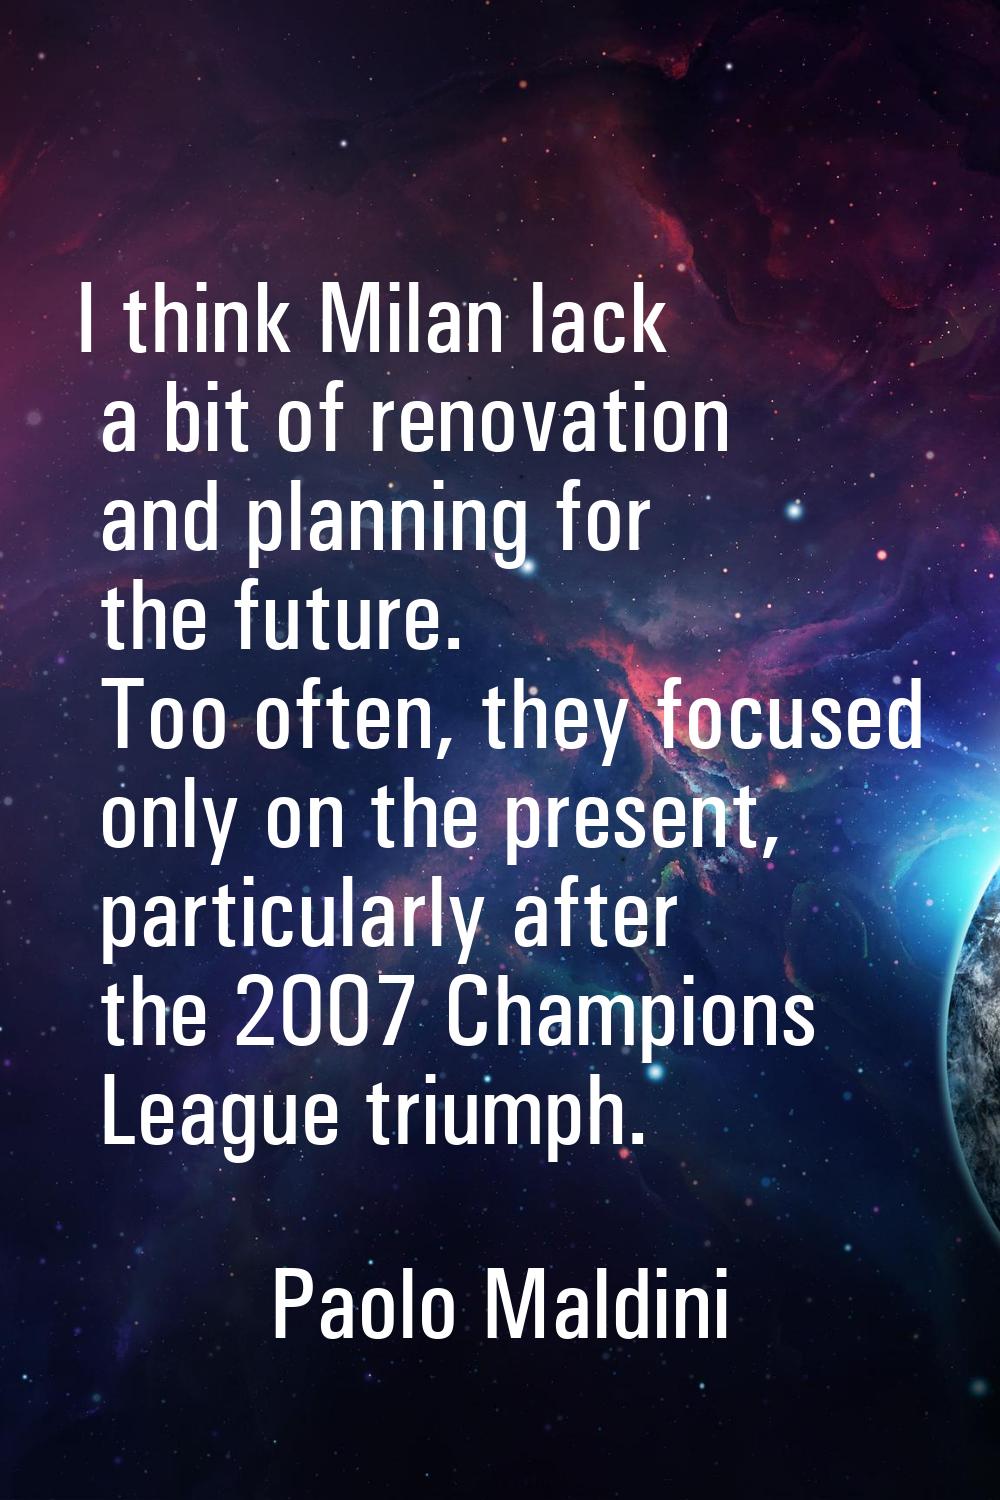 I think Milan lack a bit of renovation and planning for the future. Too often, they focused only on